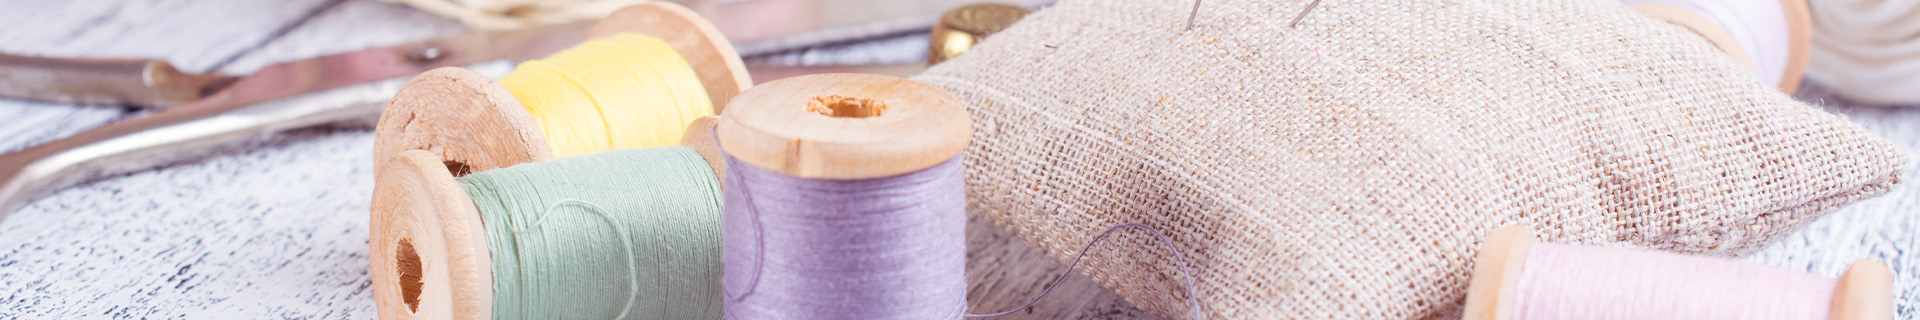 Craft materials such as yarn and needles lays on a desk.